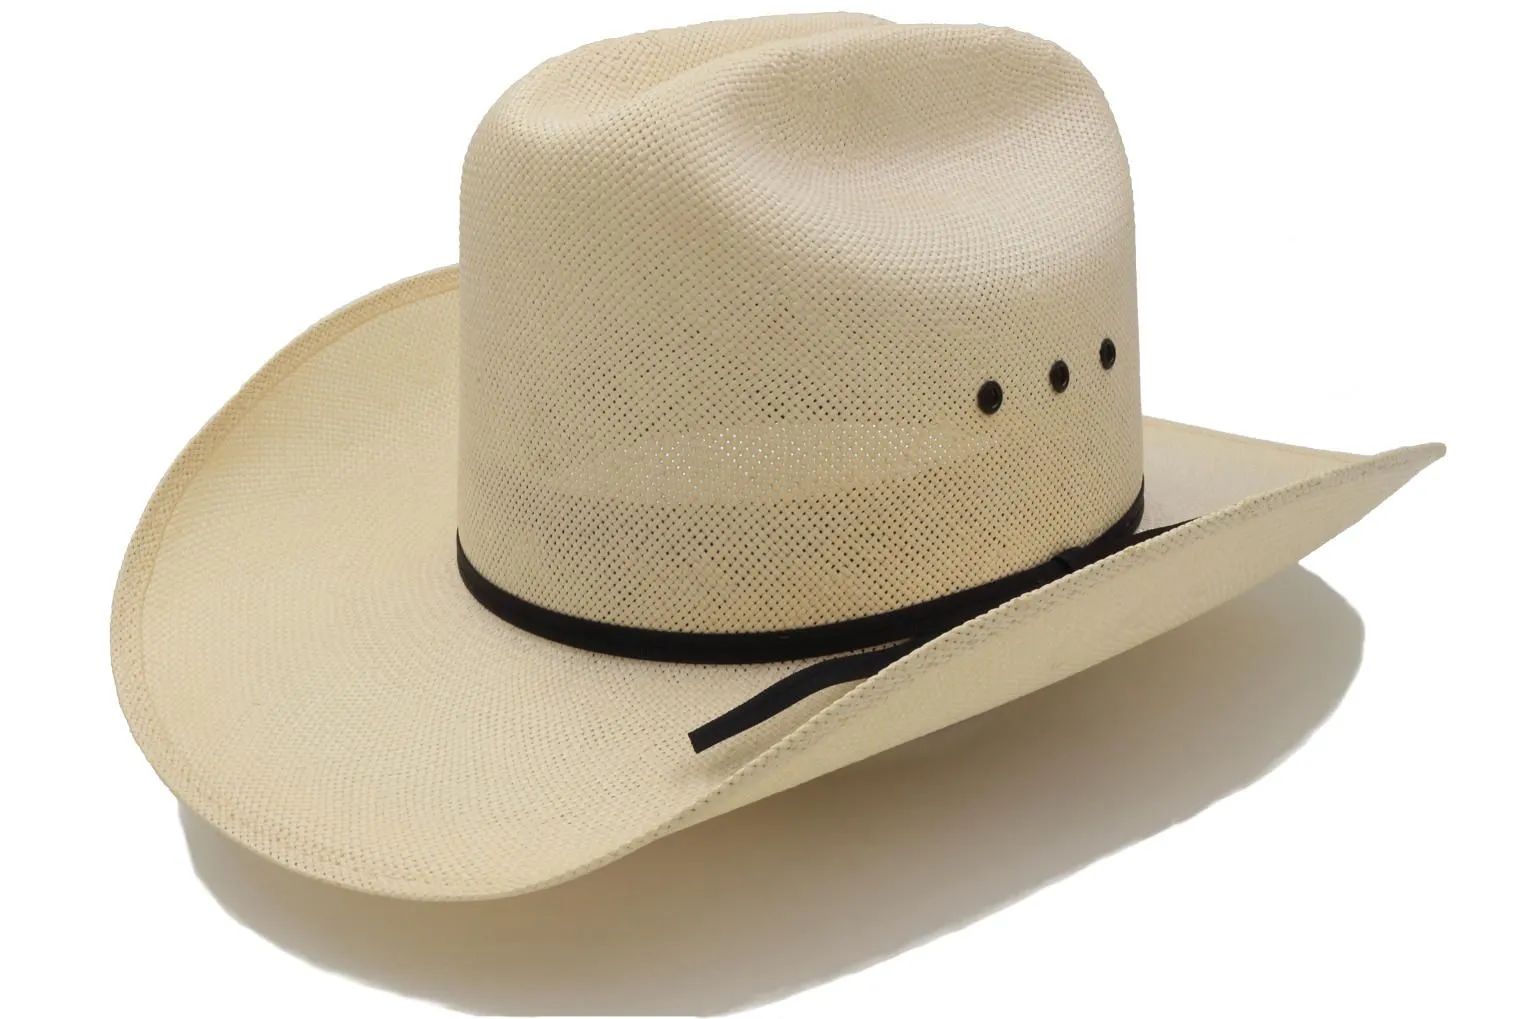 Stratton Hats Straw western style hat buyers guide